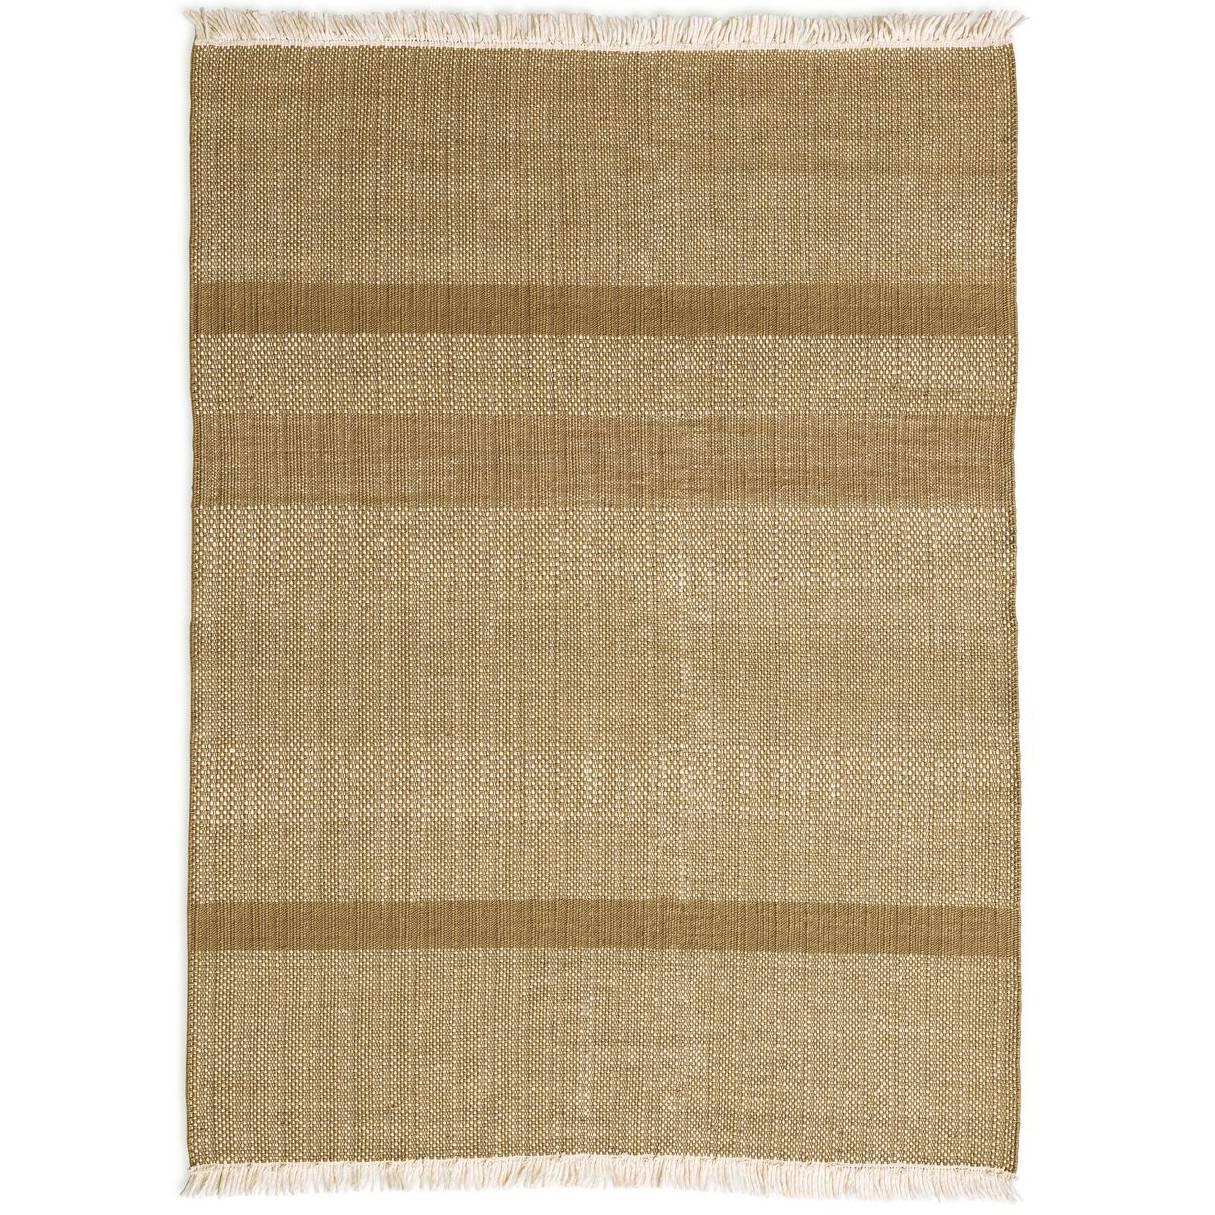 Tres Ochre Hand-Loomed Wool and Felt Texture Rug by Nani Marquina, Small For Sale